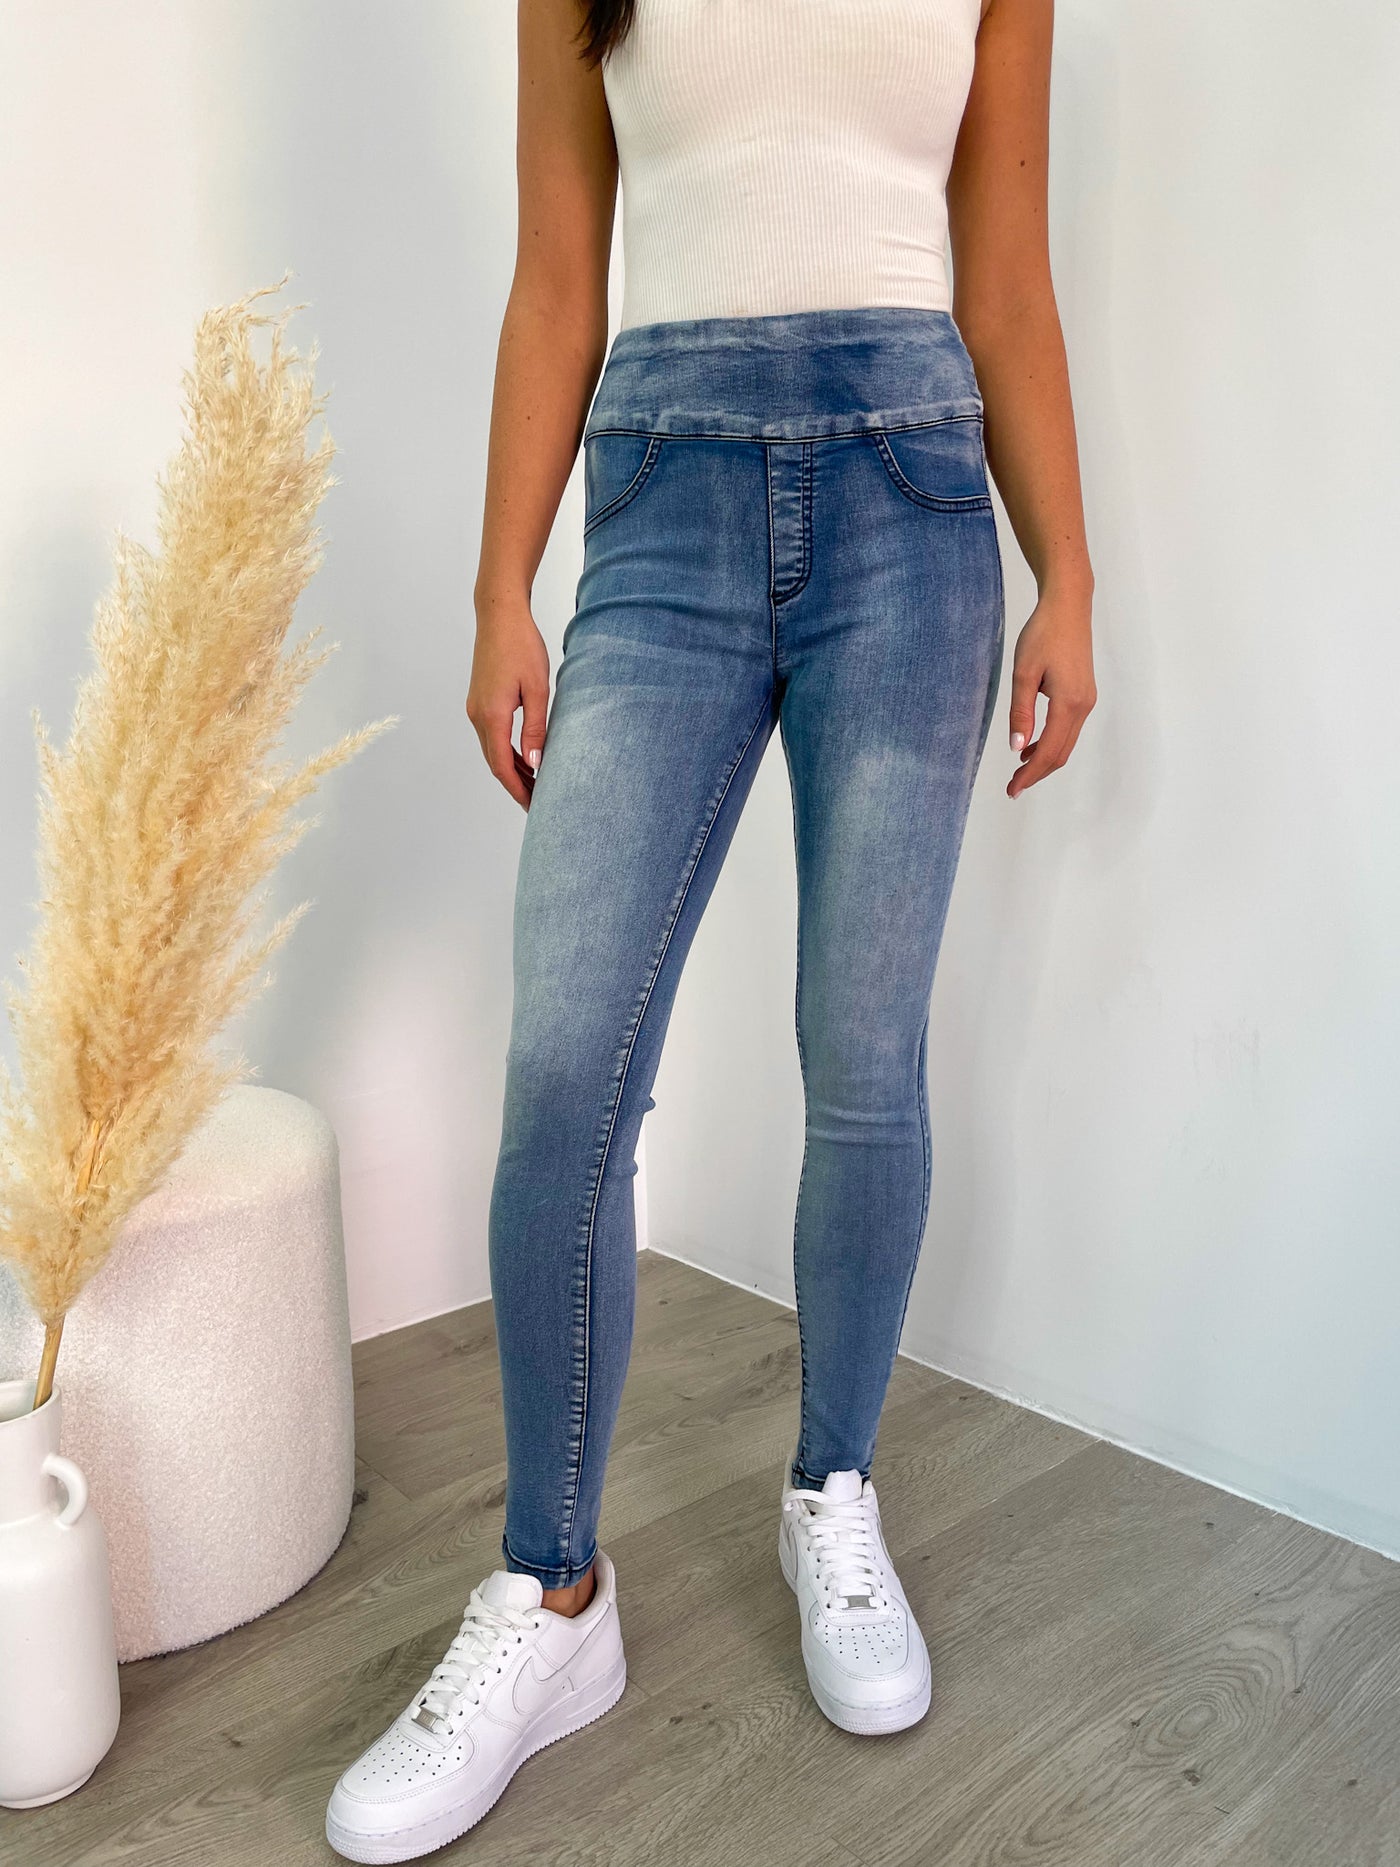 DYLAN PULL ON STRETCH JEAN - BLUE